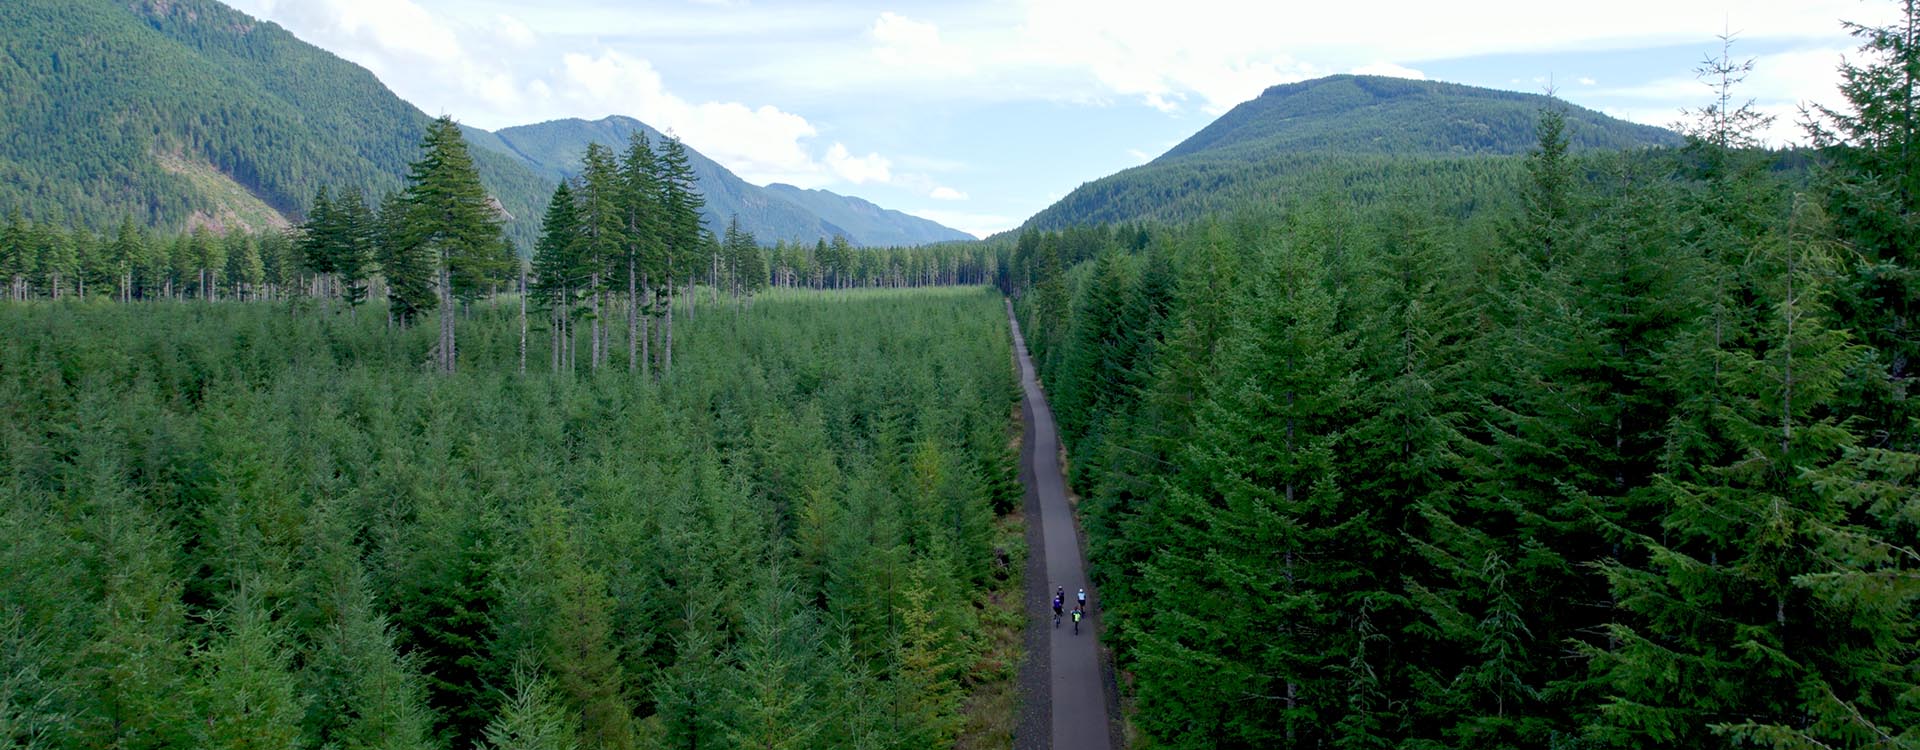 Cyclist ride up road that cuts through a thick forest.